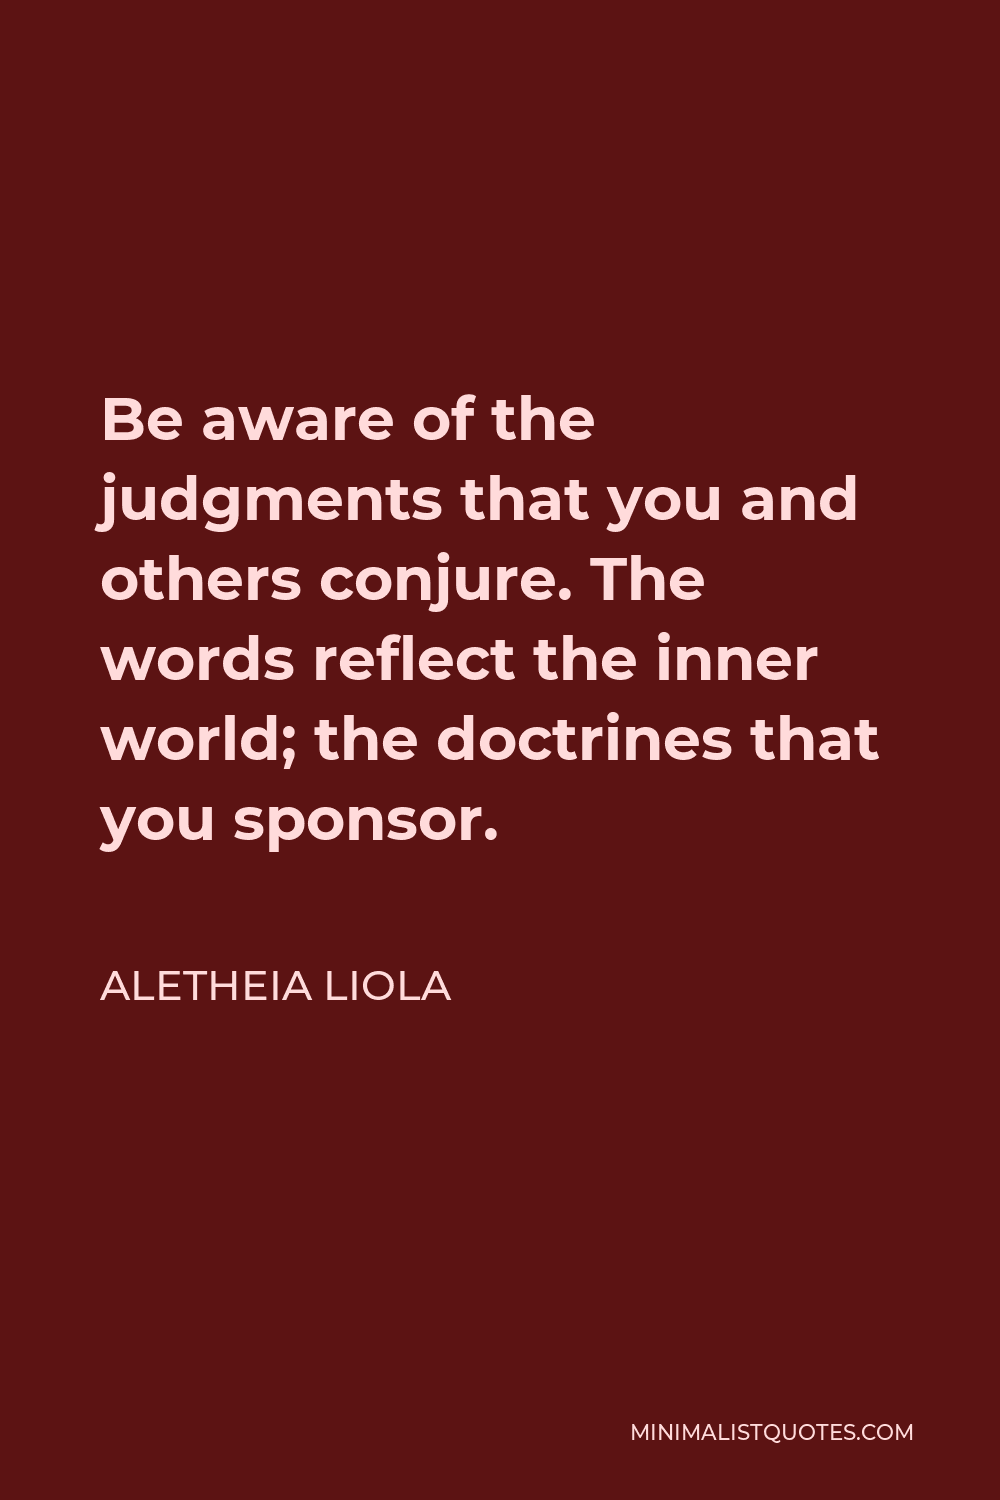 Aletheia Liola Quote - Be aware of the judgments that you and others conjure. The words reflect the inner world; the doctrines that you sponsor.